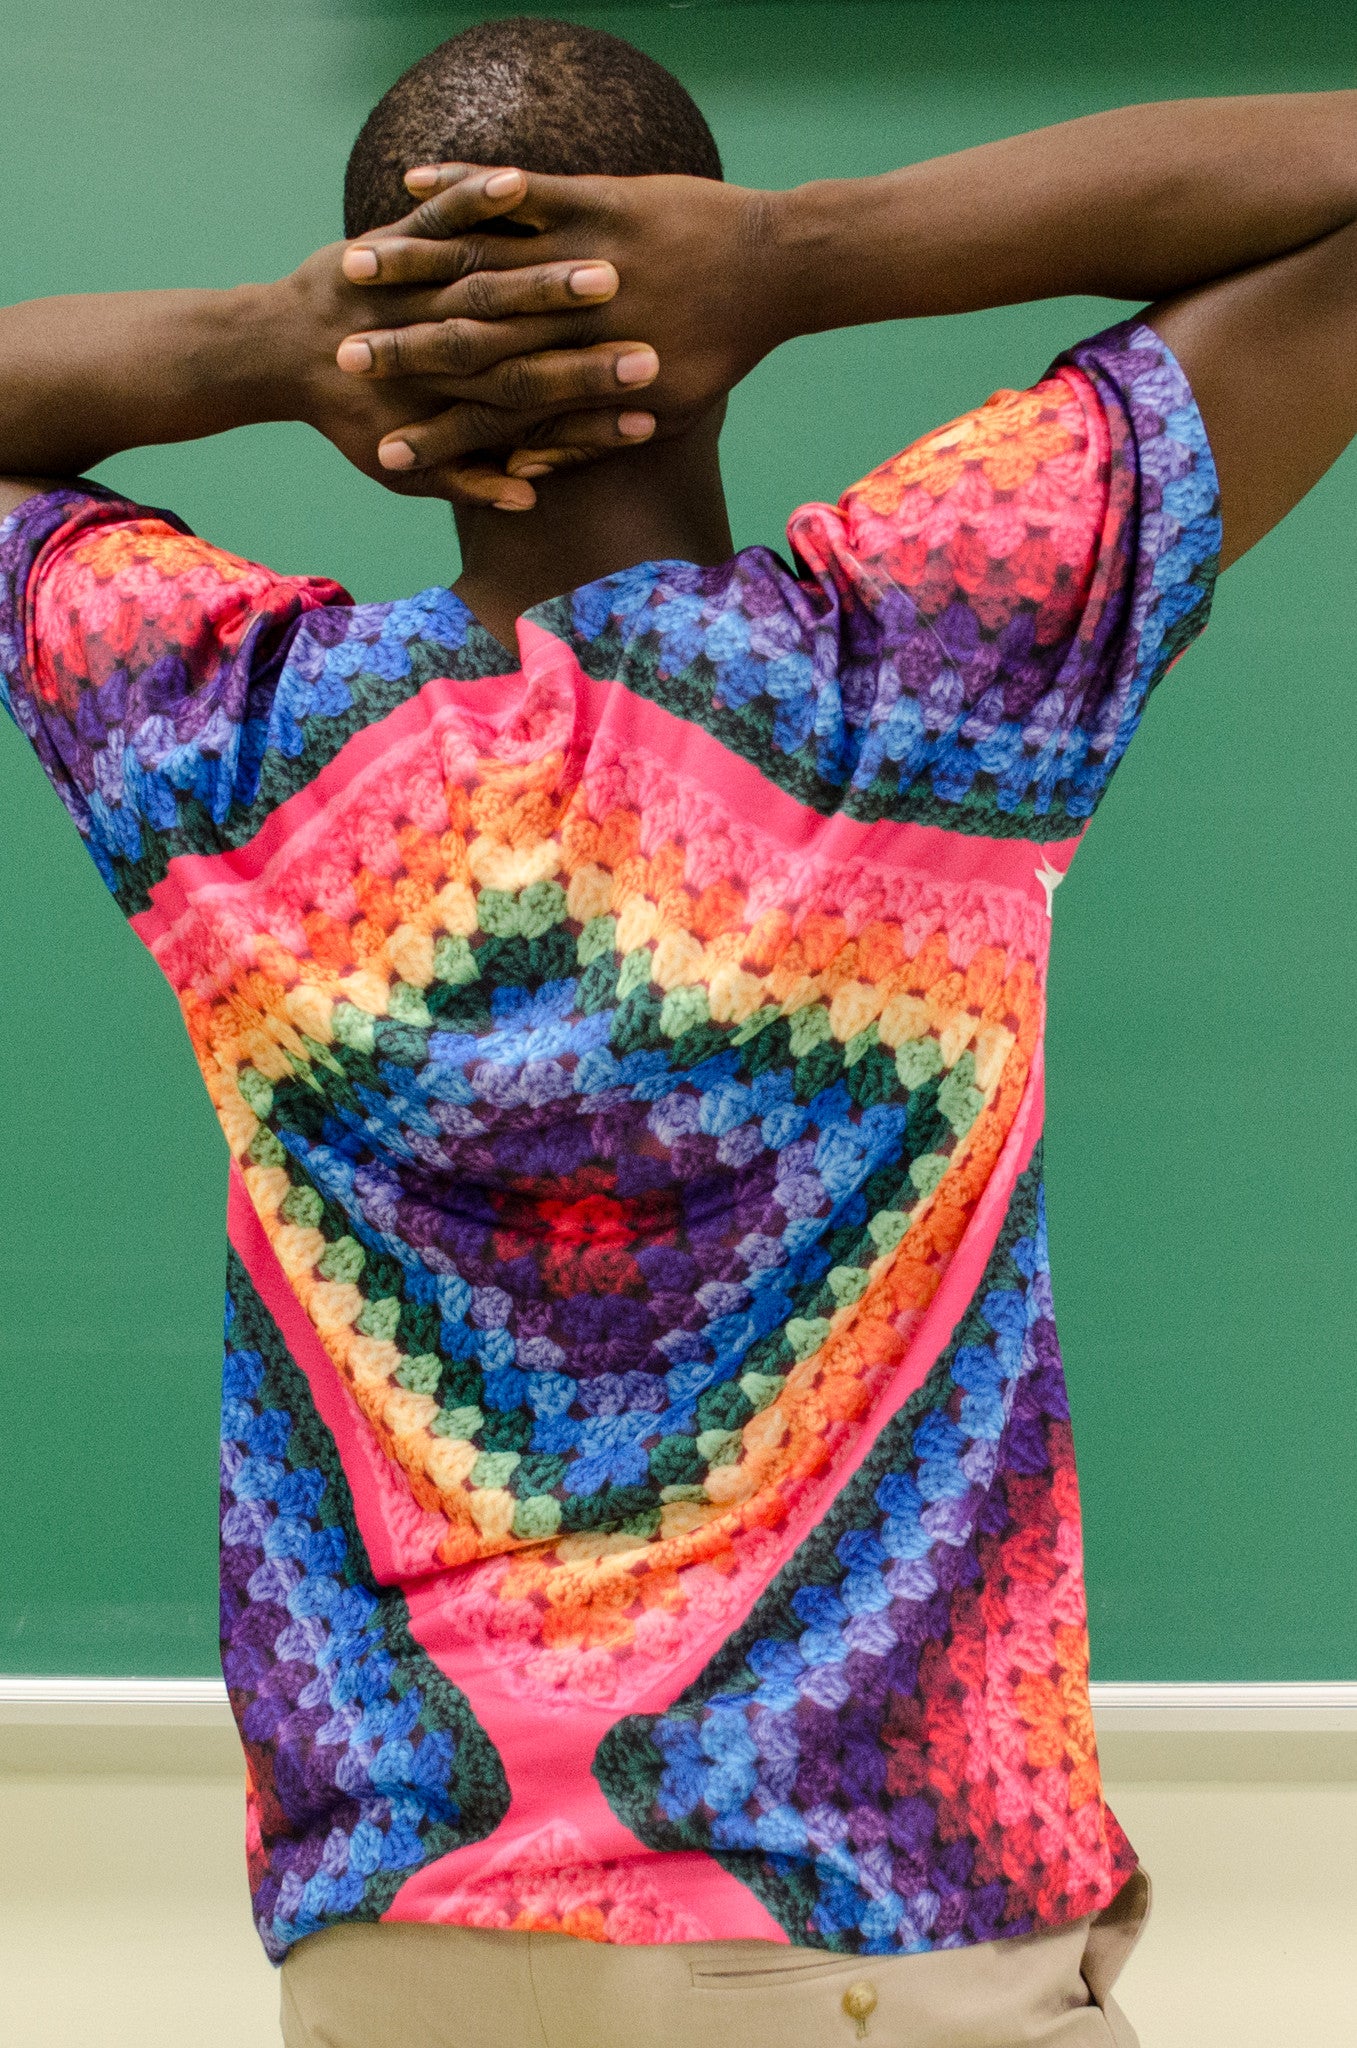 Snapdragon Brand Clothing Granny Square Crochet Print rainbow tie-dye t-shirt in style Rainbow Soul features a vintage psychedelic hippie boho feel and a rainbow of colors. Made of comfortable polyester.